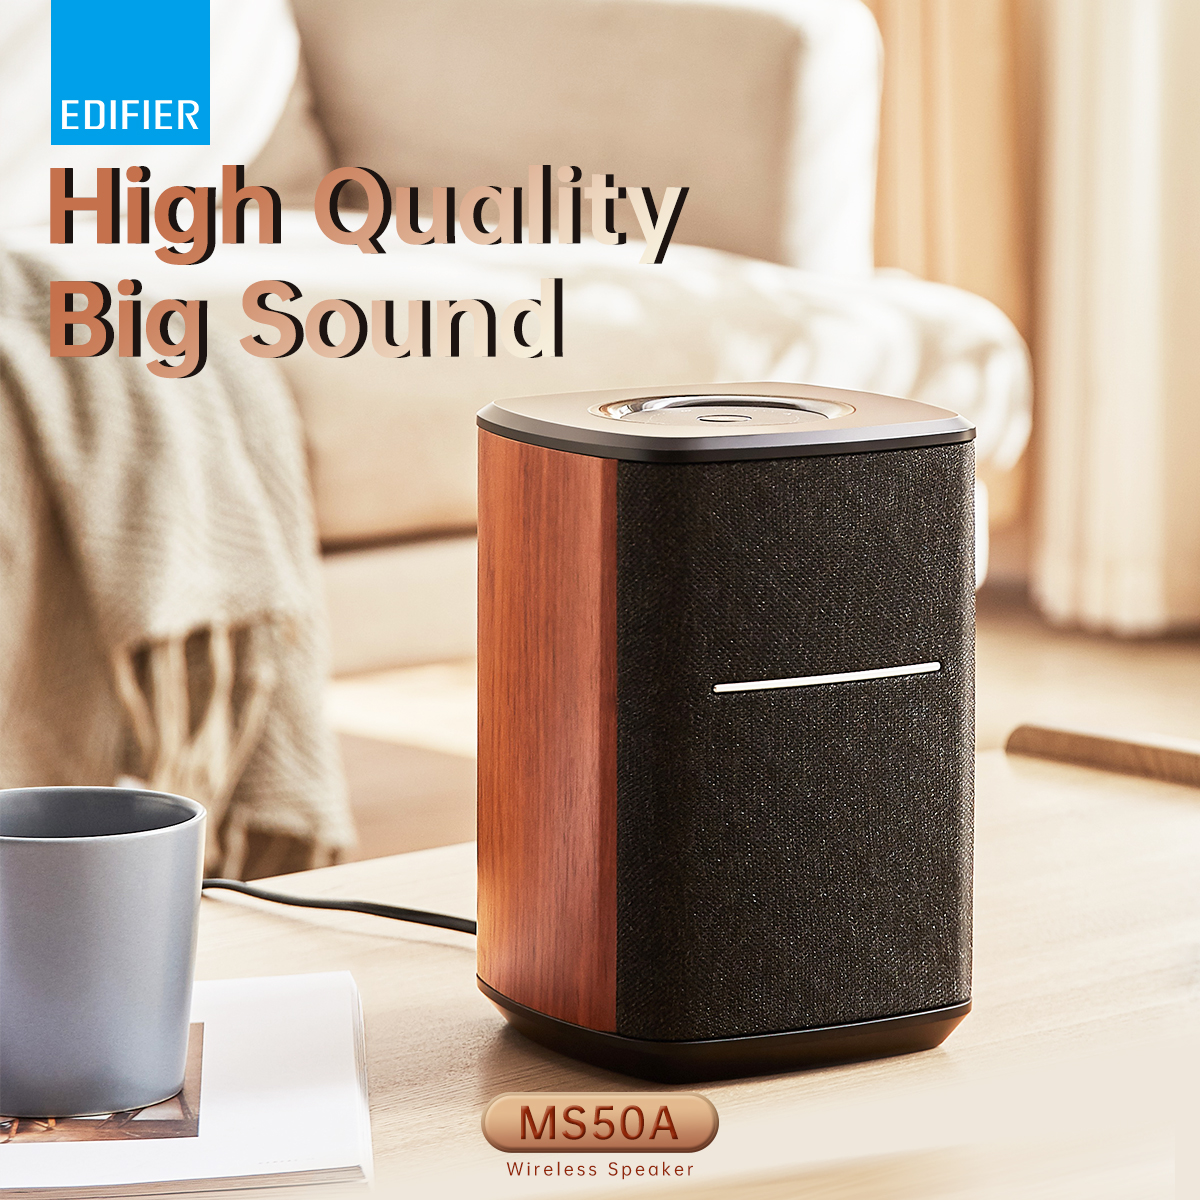 MS50A Wireless Smart Speaker with multi-room connectivity